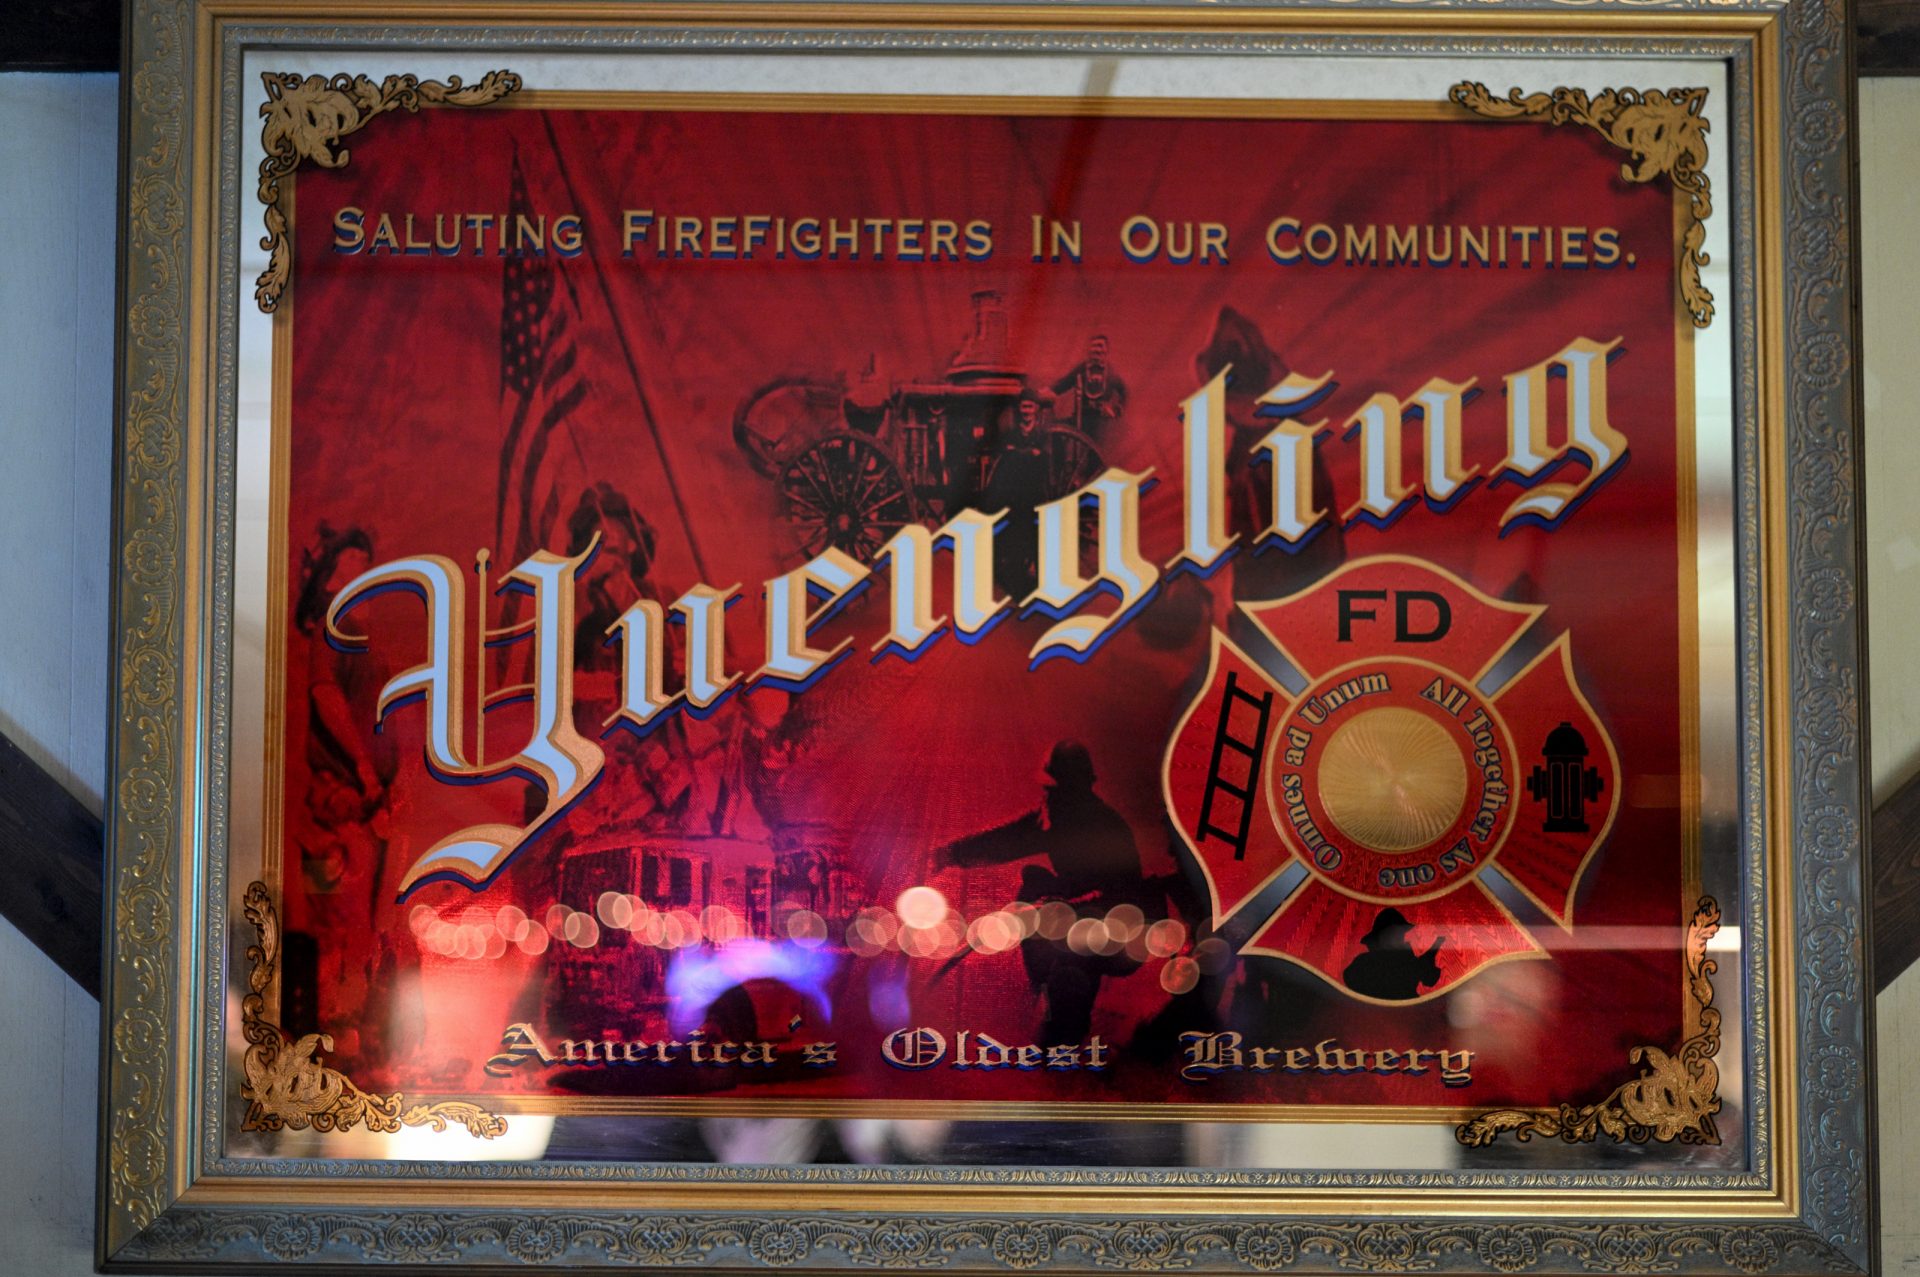 Interior details found at the Social Quarters of Deer Lake & West Brunswick Fire Company No. 1, in Orwigsburg, PA, on December 15, 2019.